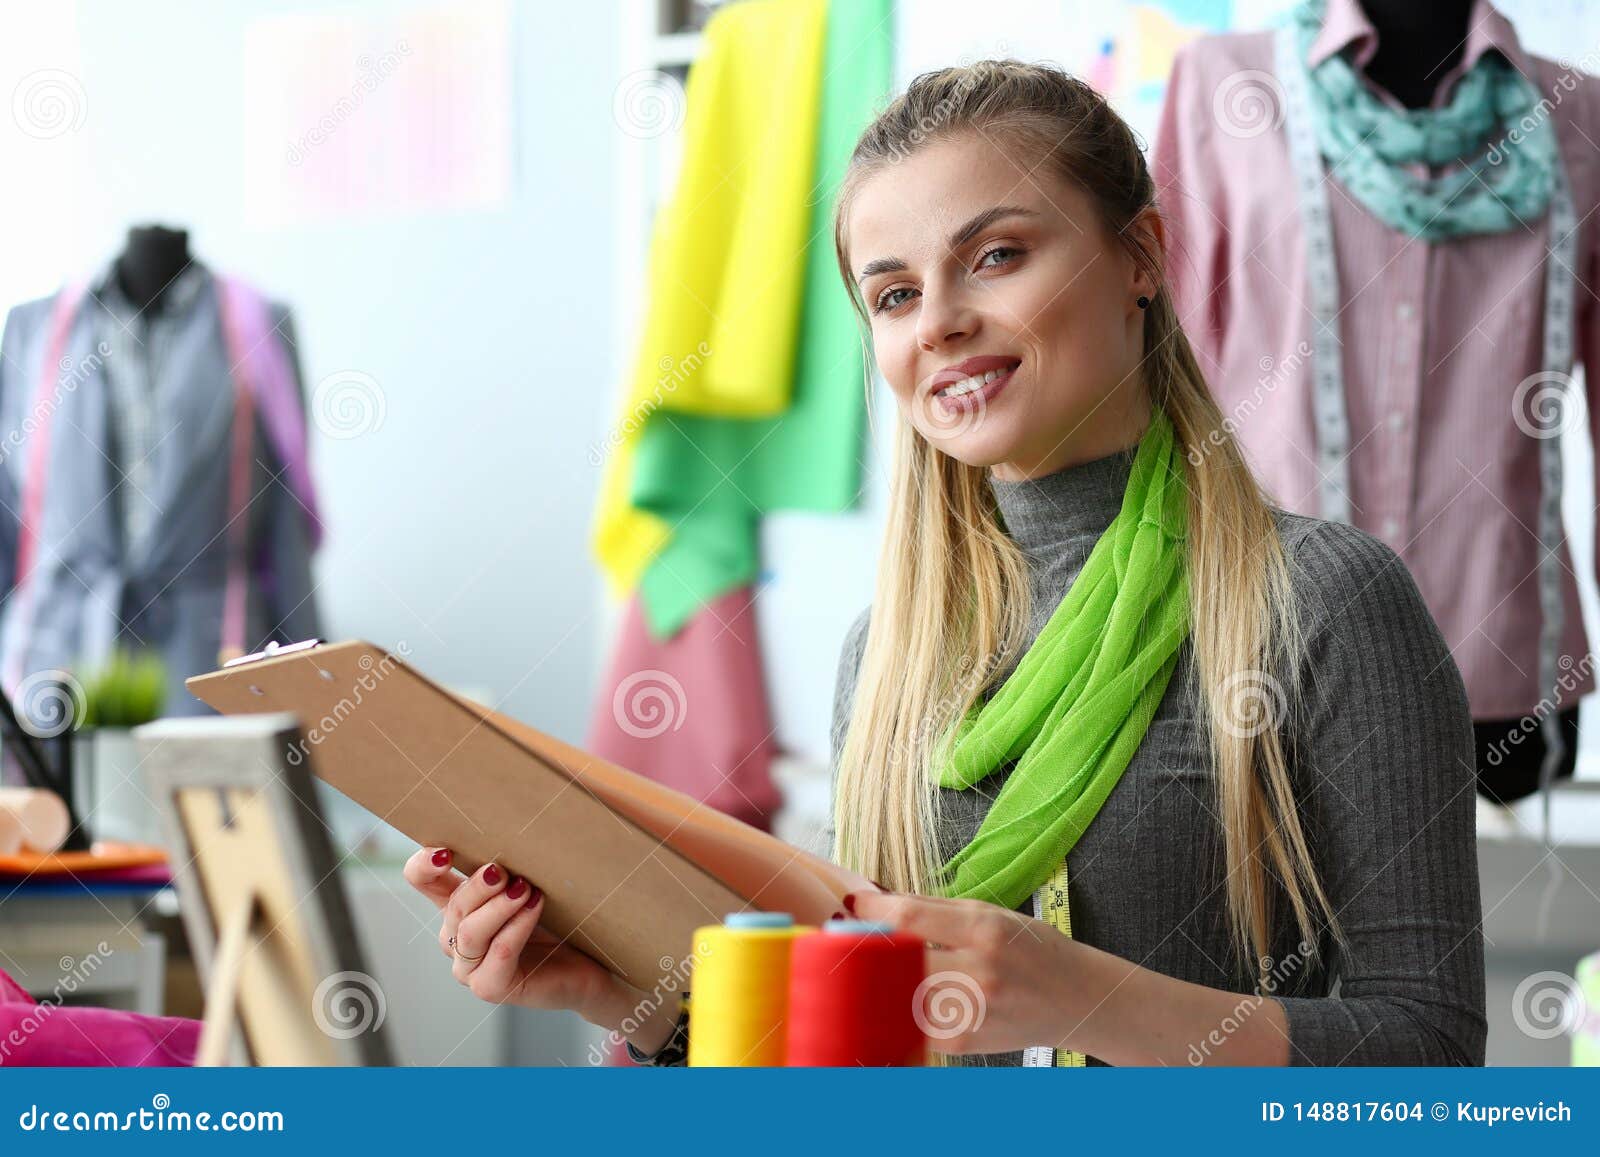 Dressmaking and Sewing Service Clothes Creation Stock Photo - Image of ...